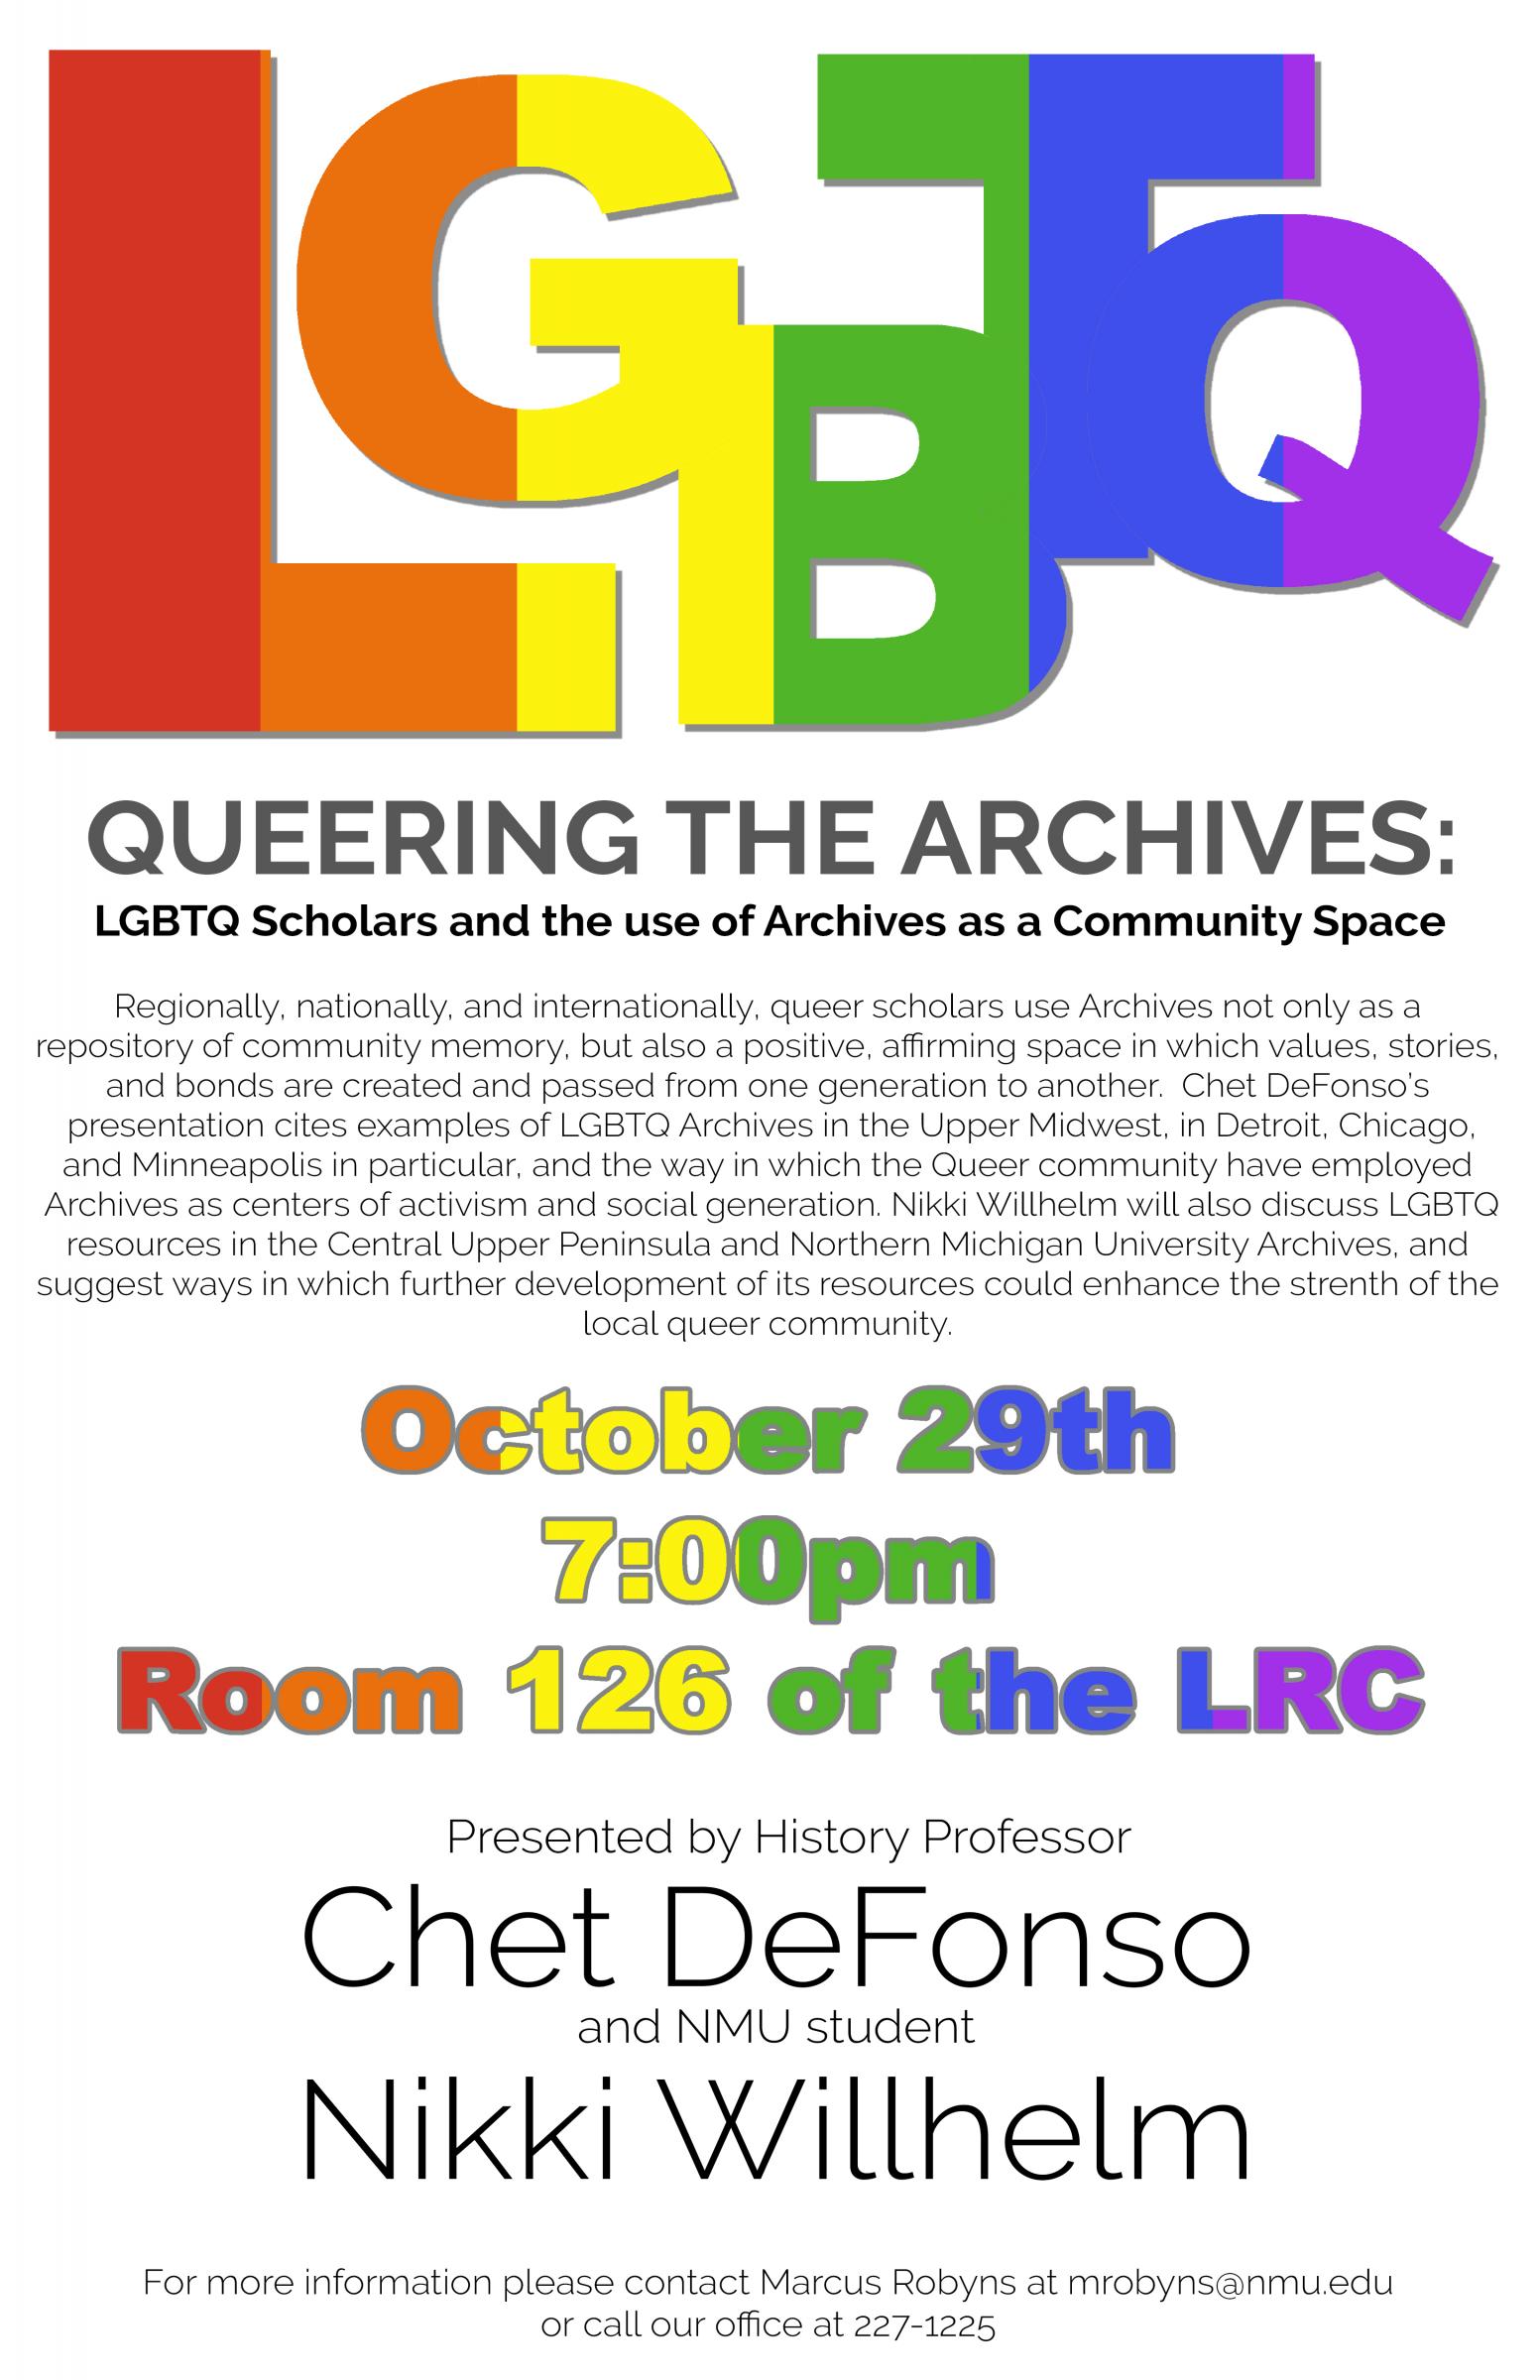 Evening at the Archives: Queering the Archives